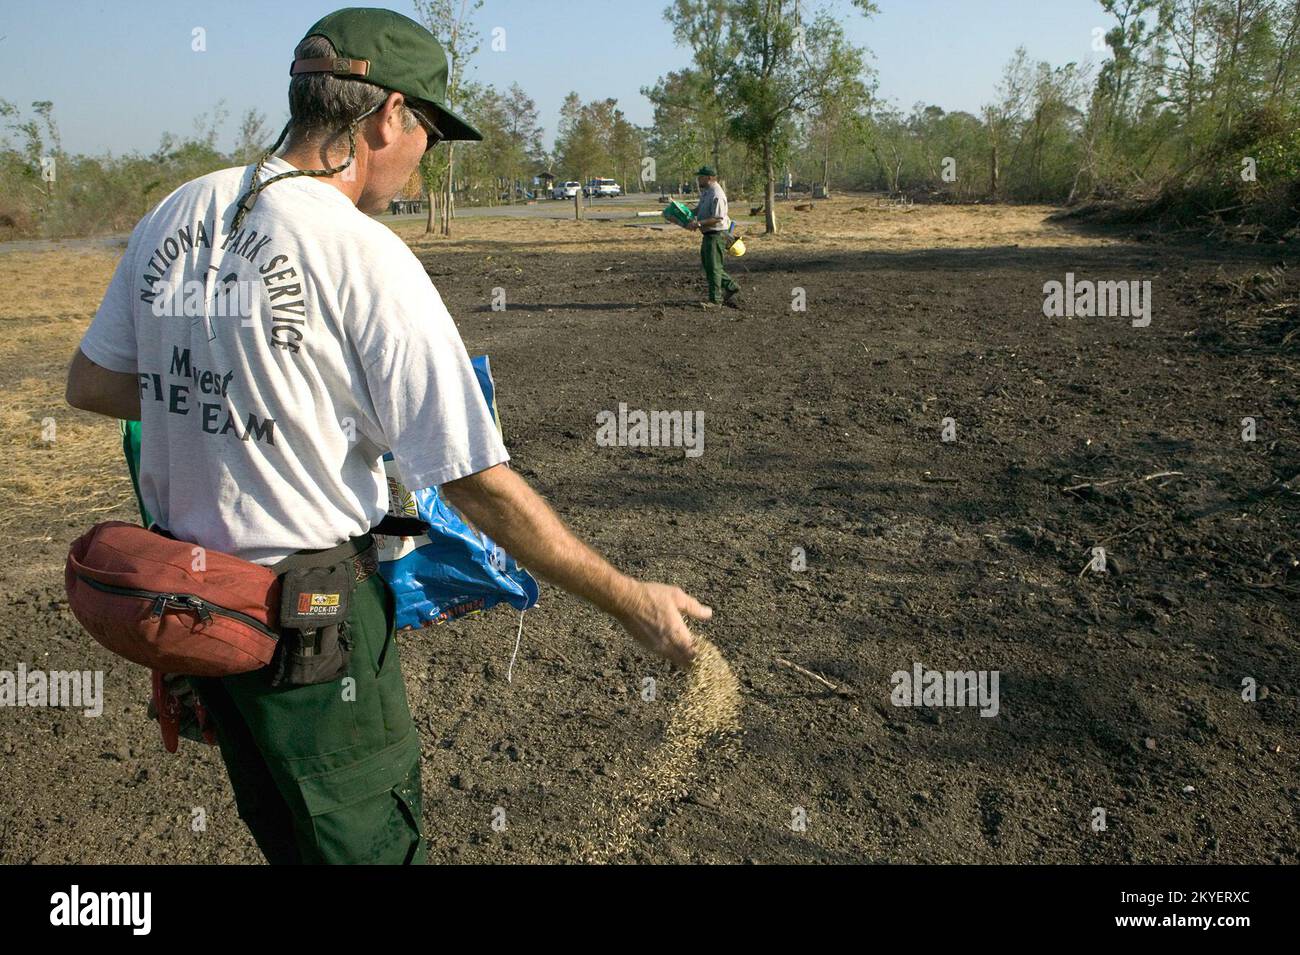 Hurricane Katrina, New Orleans, LA.,10/12/2005--National Park Service ranger, Kevin Kelley, from Michigan, assists with the reseeding at the Bayou Segnette State Park ouside of New Orleans. More than 500 National Park Service emplyees have left their homes to hlp out following Hurricane Katrina. FEMA photo/Andrea Booher Stock Photo